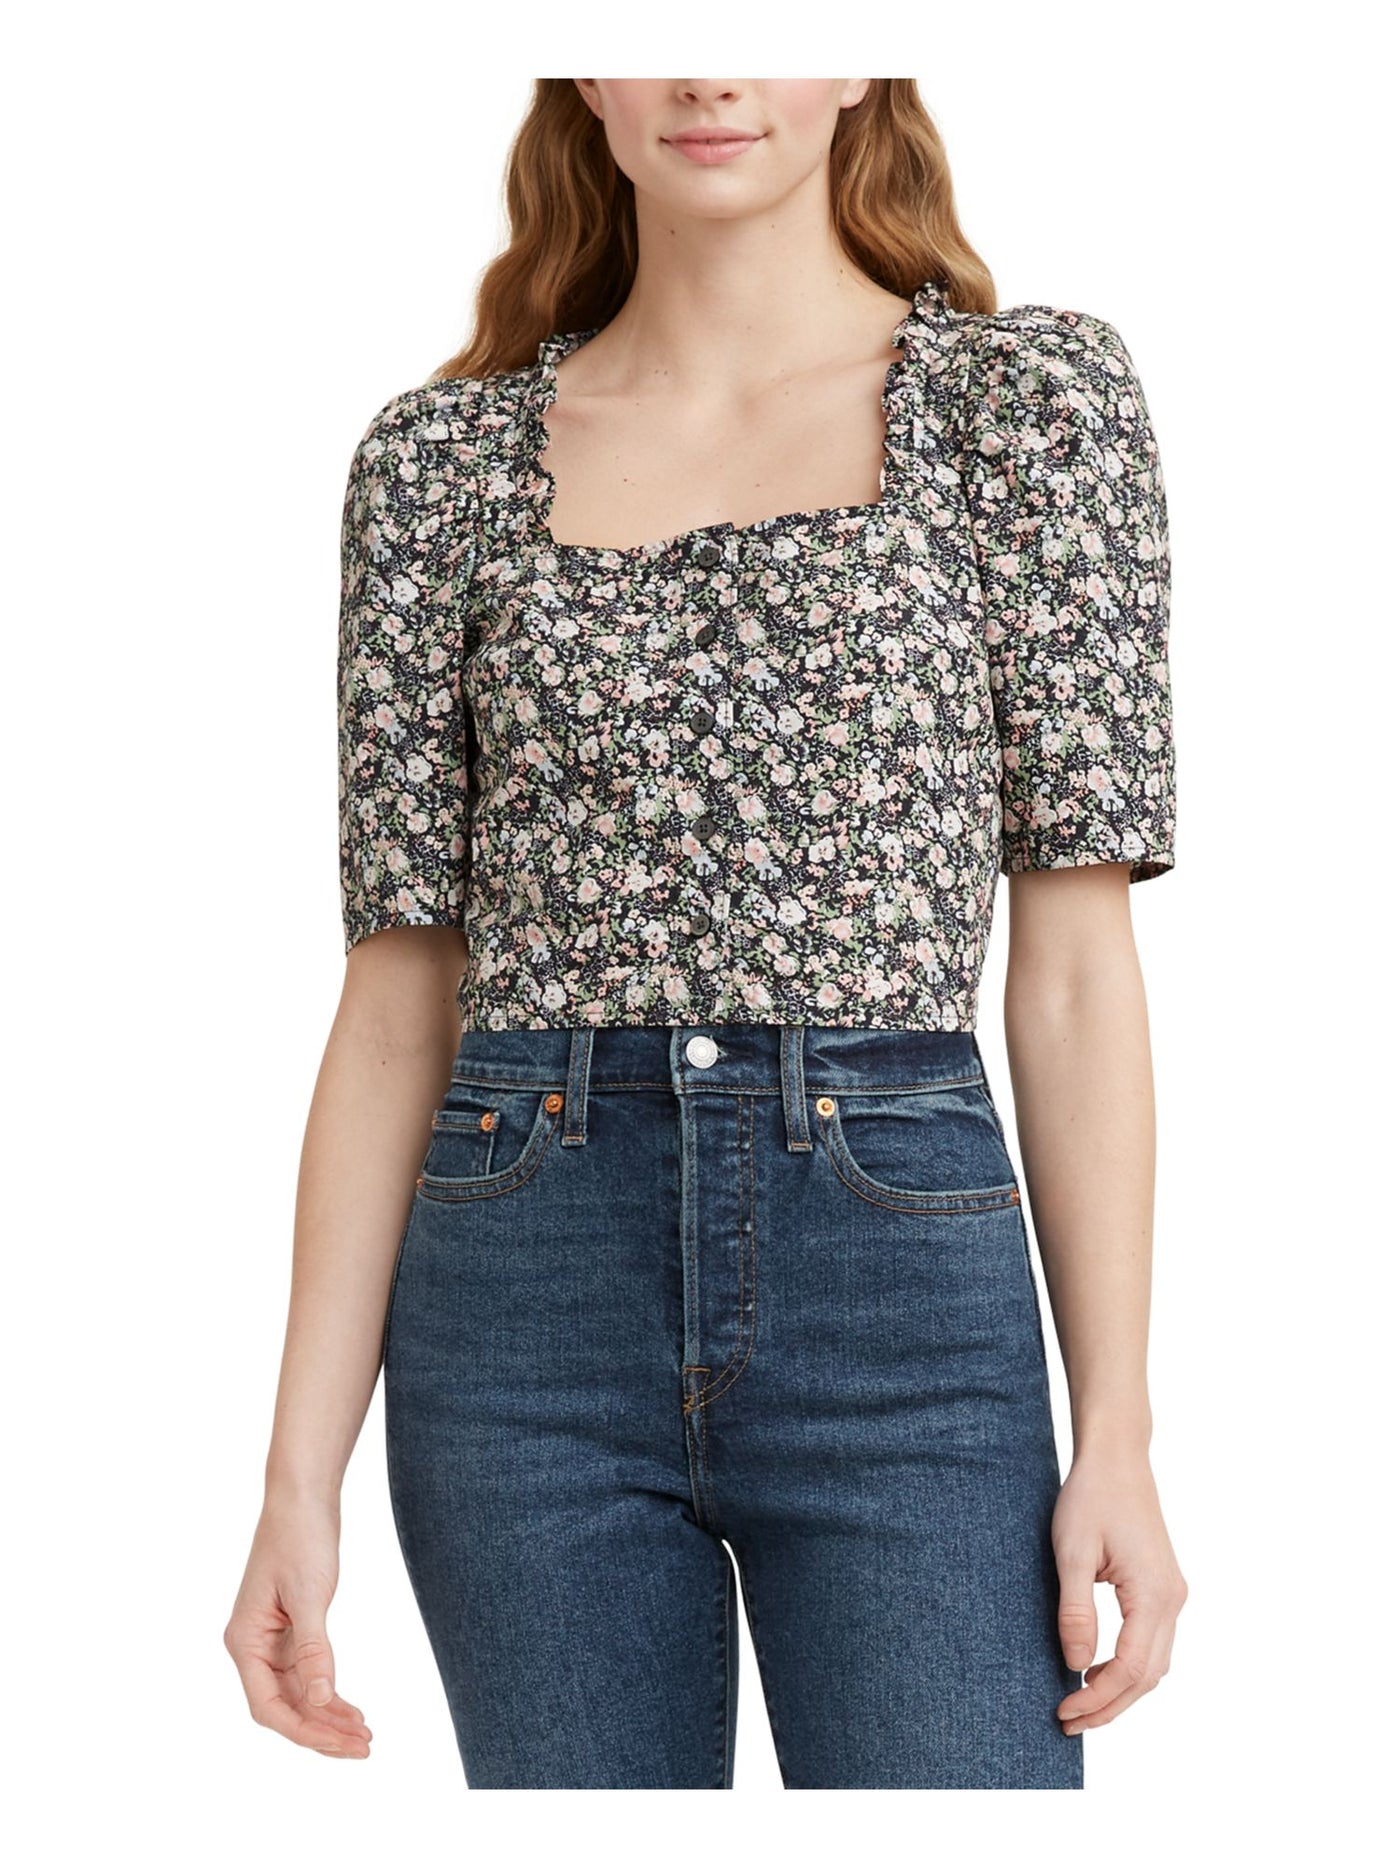 LEVI'S Womens Black Ruffled Buttoned Elbow-puff-sleeves Floral Square Neck Blouse XXL